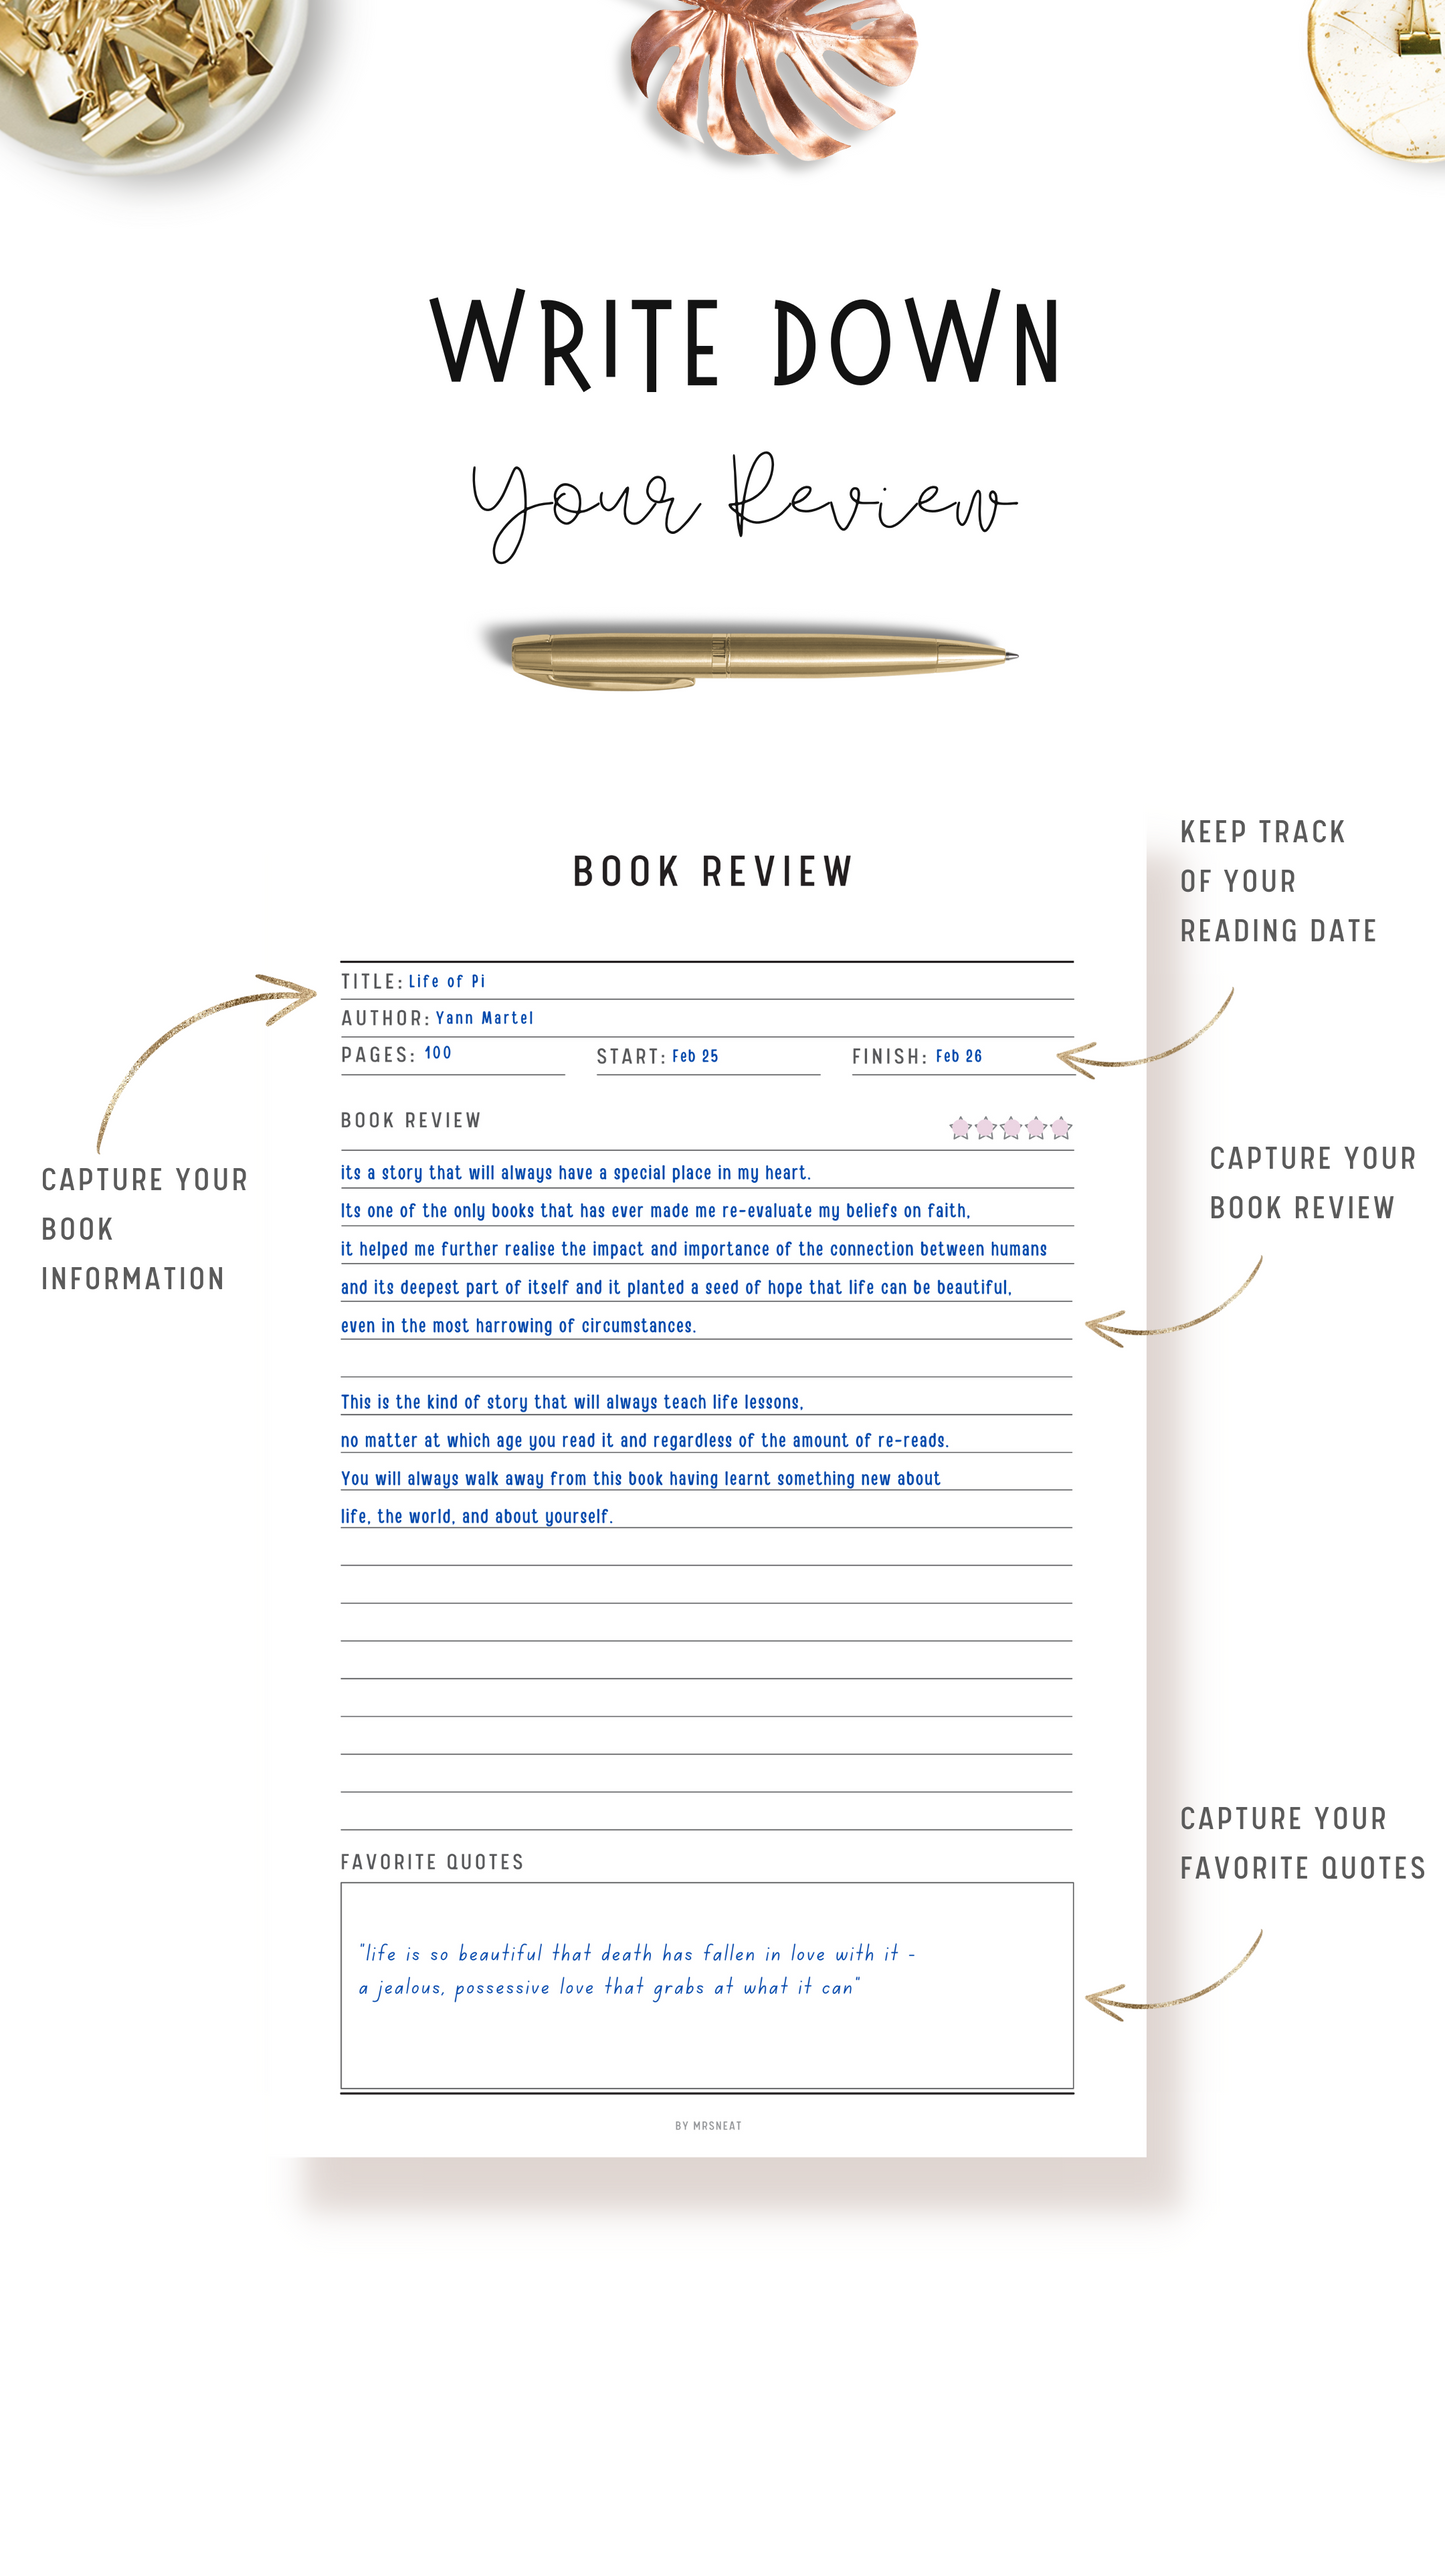 Book Review with room for capture book information such as reading date, star rate, favorite quotes and many more